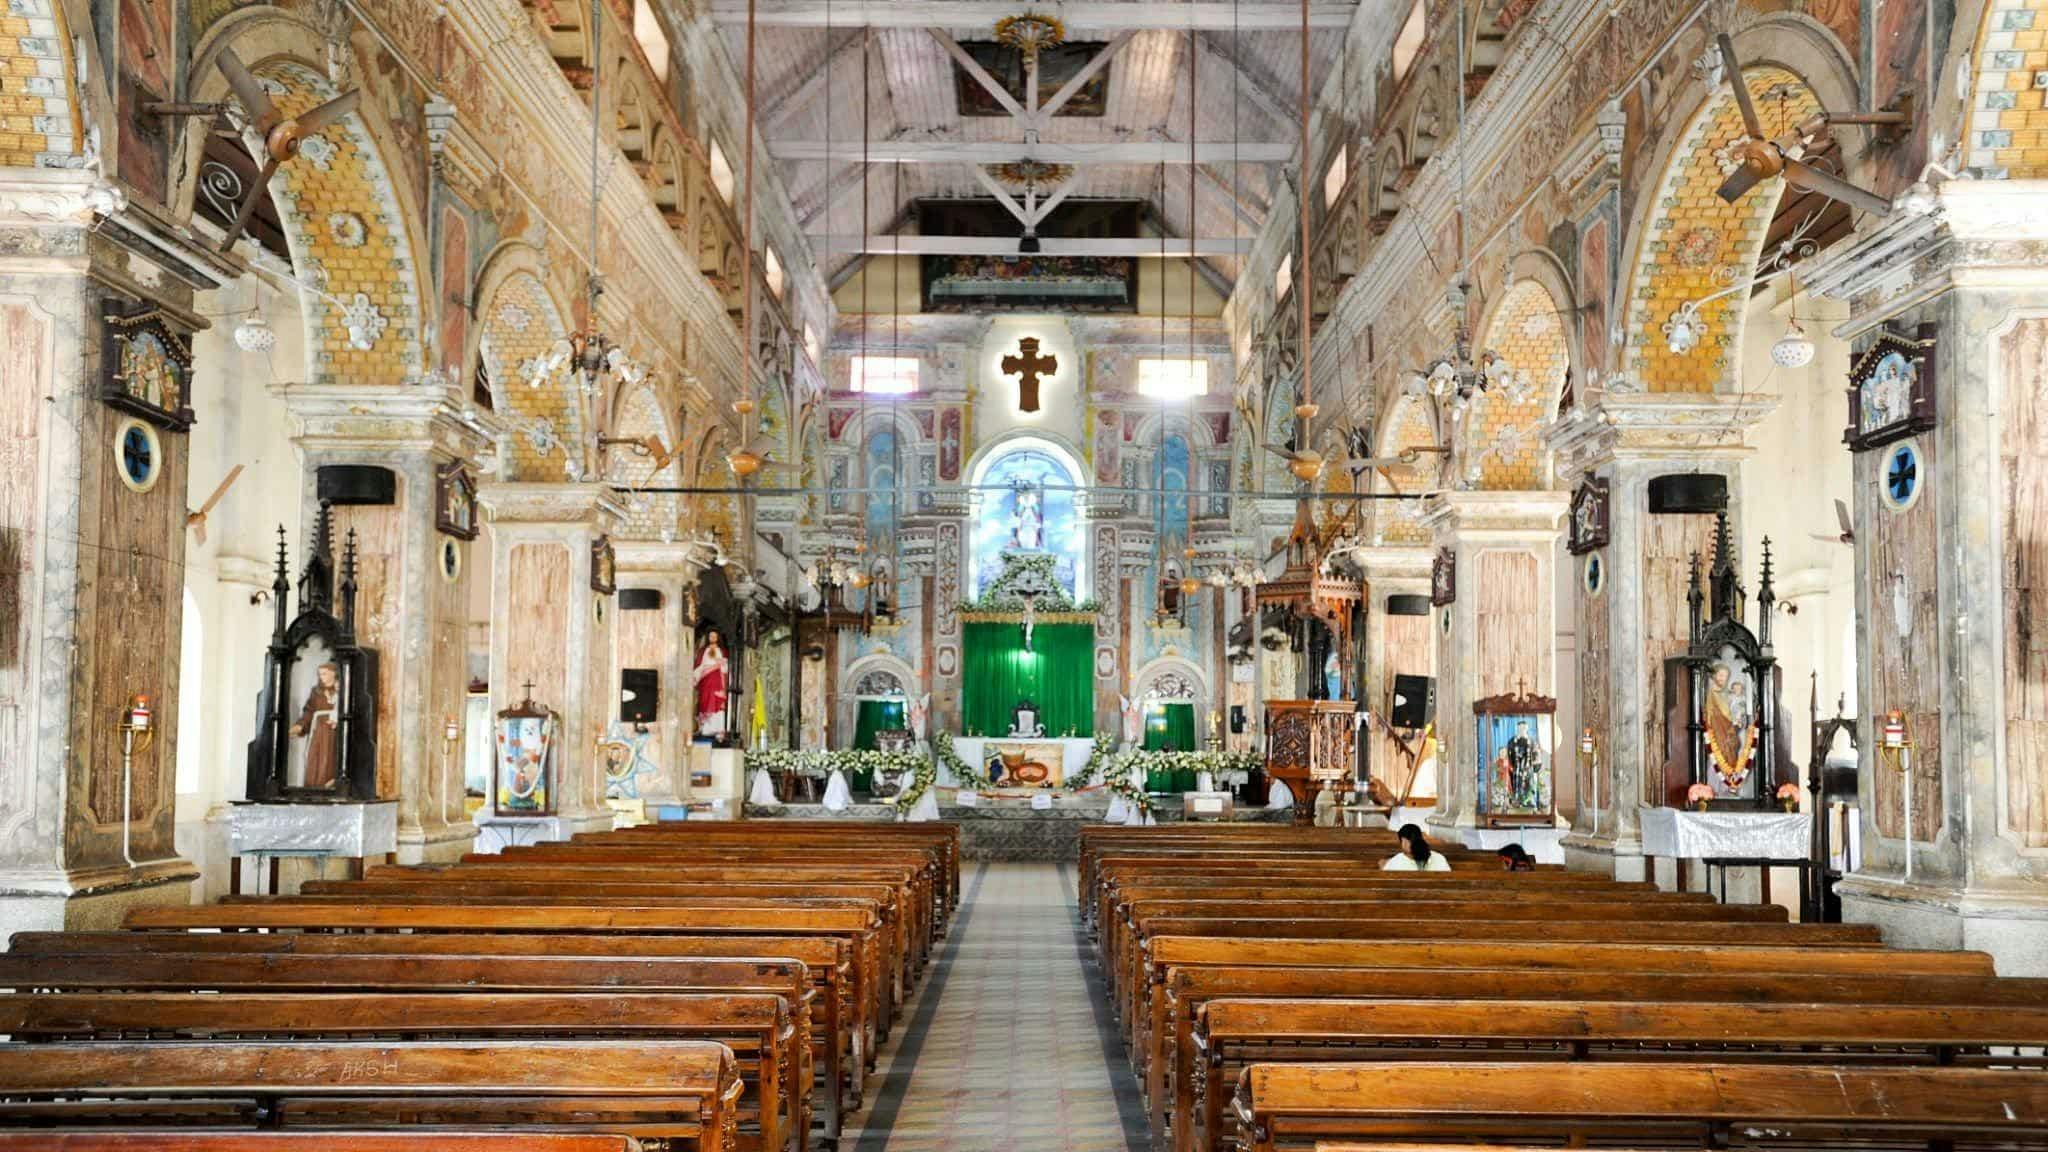 Image of a church in Fort Cochin, Kerala